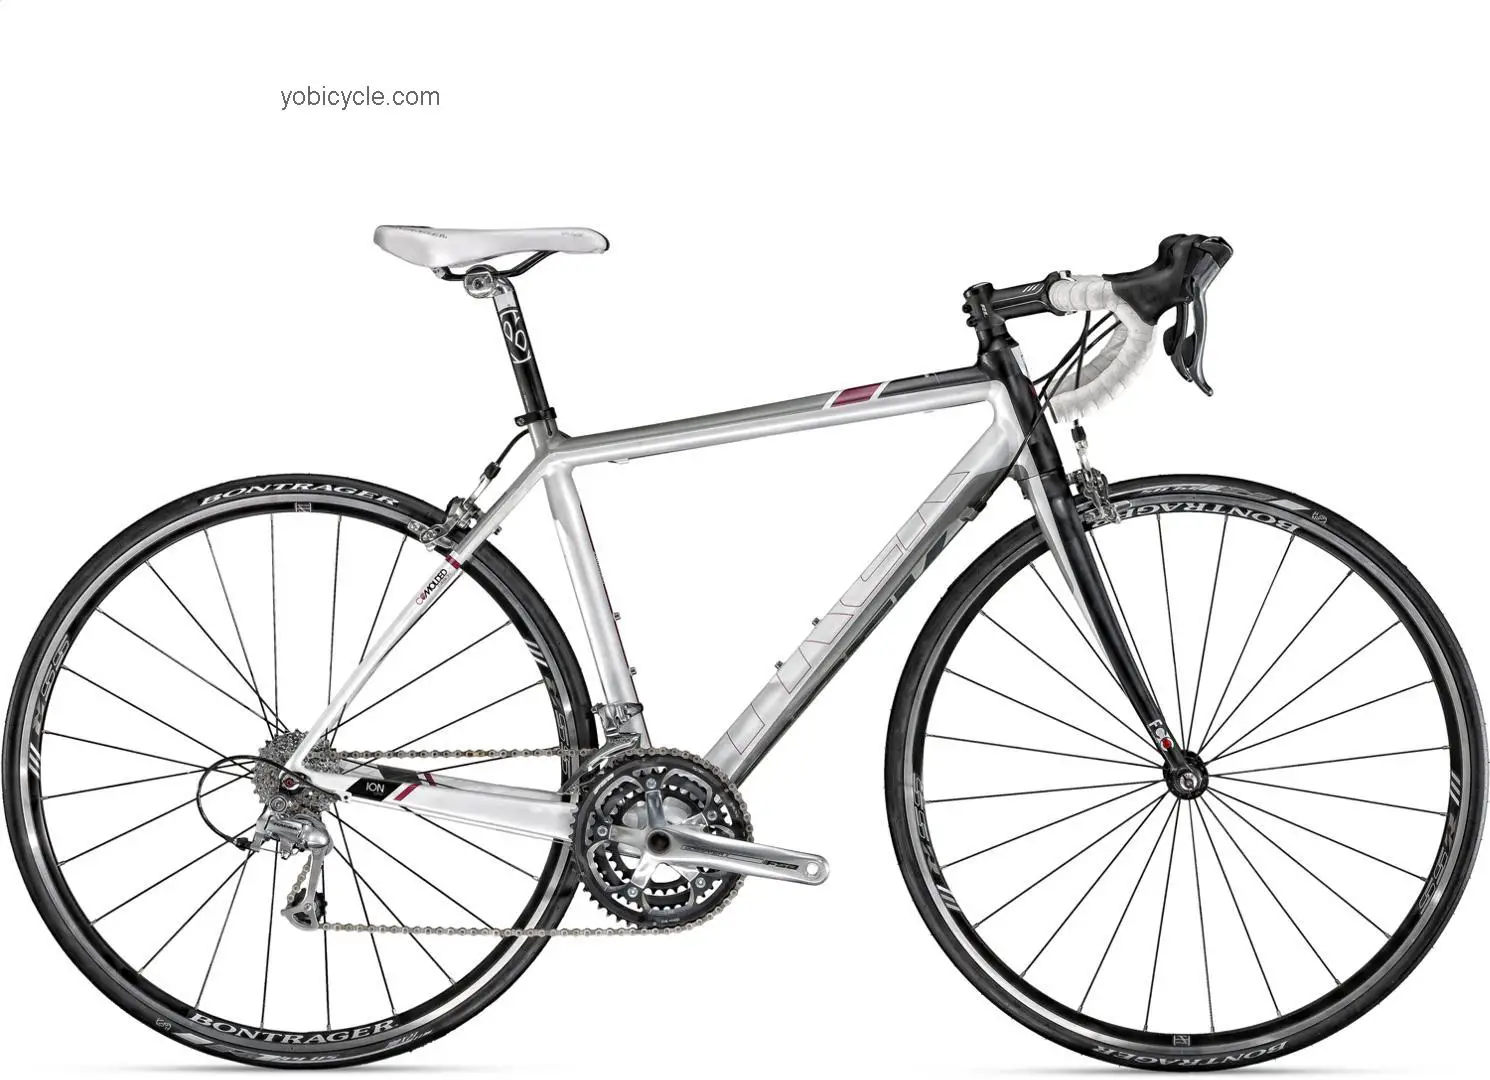 Trek Gary Fisher Ion Super WSD 2011 comparison online with competitors